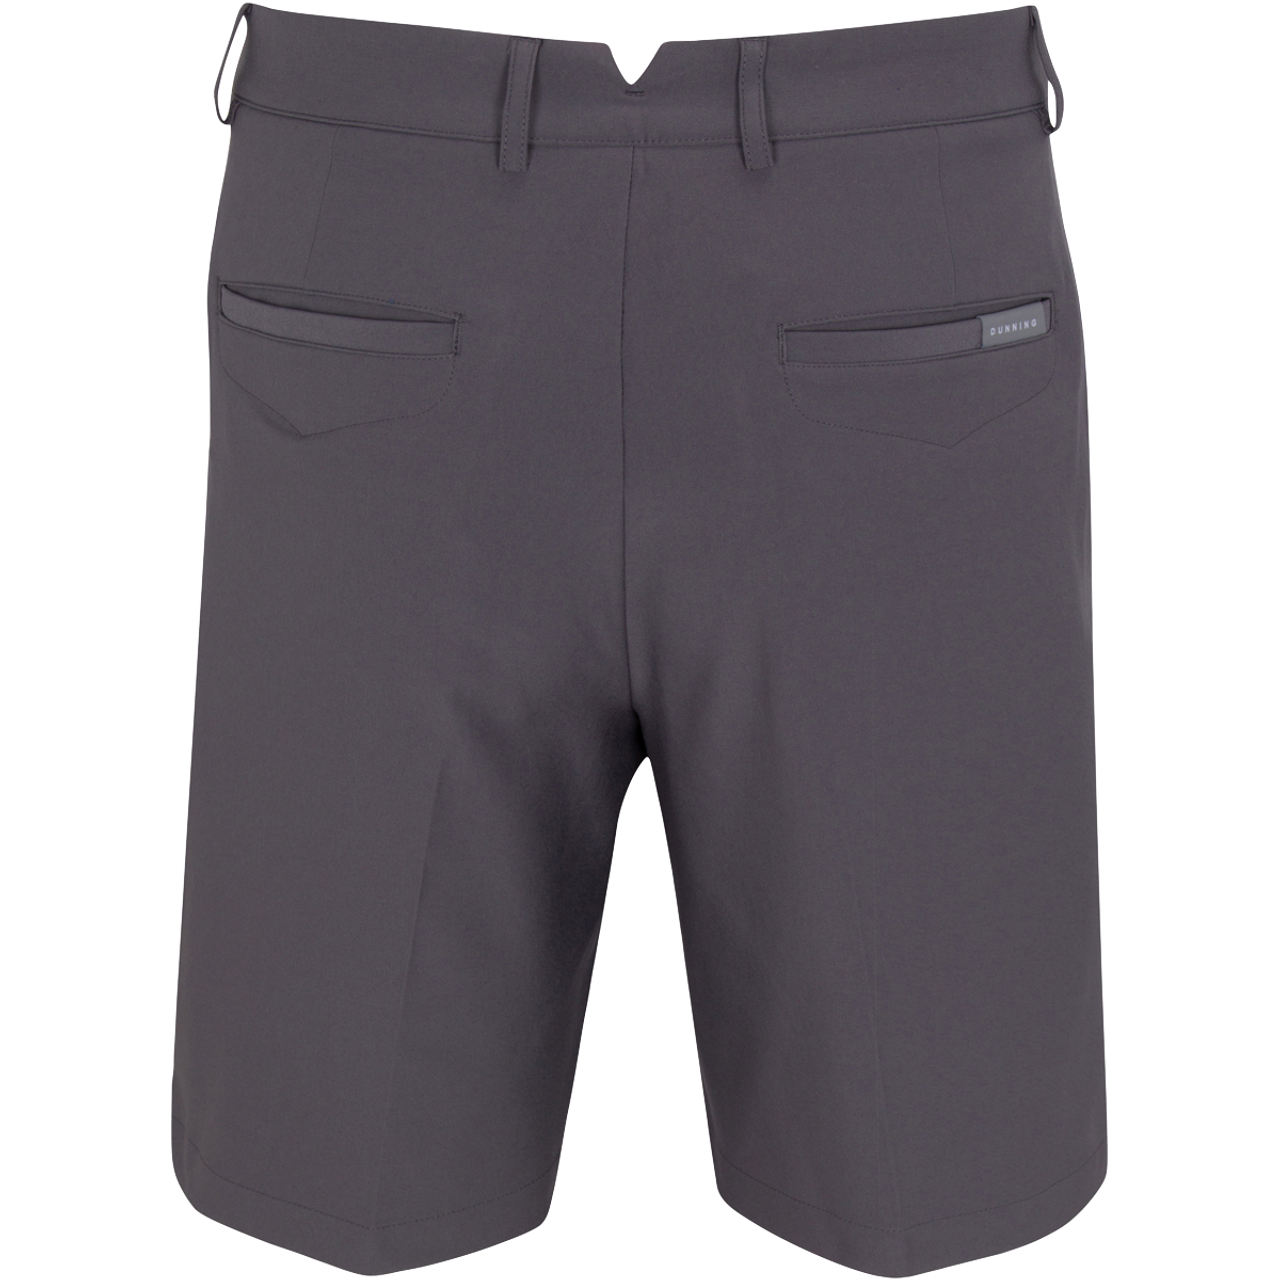 Dunning Player Fit Woven 9" Short